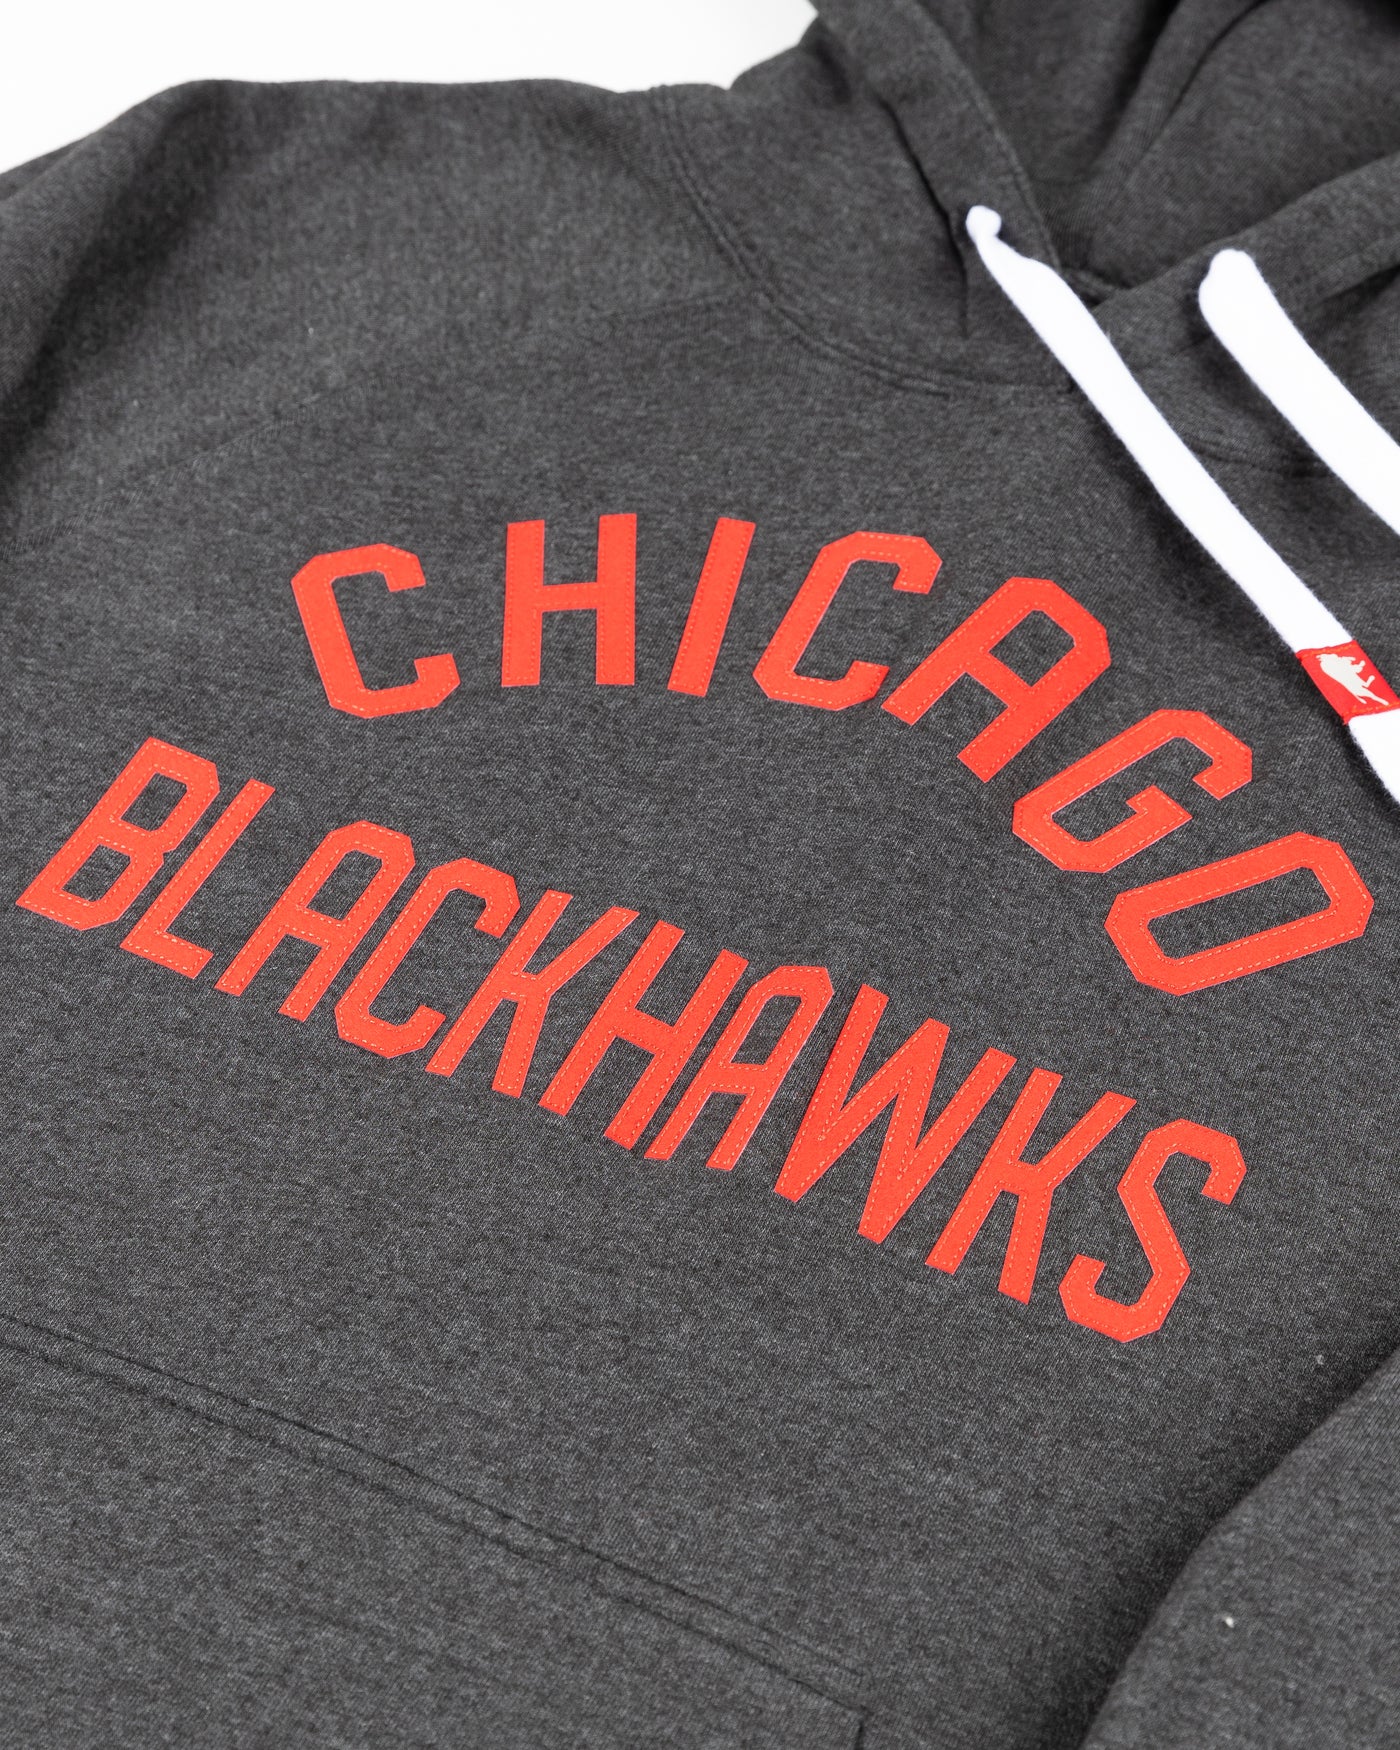 black Sportiqe hoodie with Chicago Blackhawks wordmark embroidered on front - detail lay flat